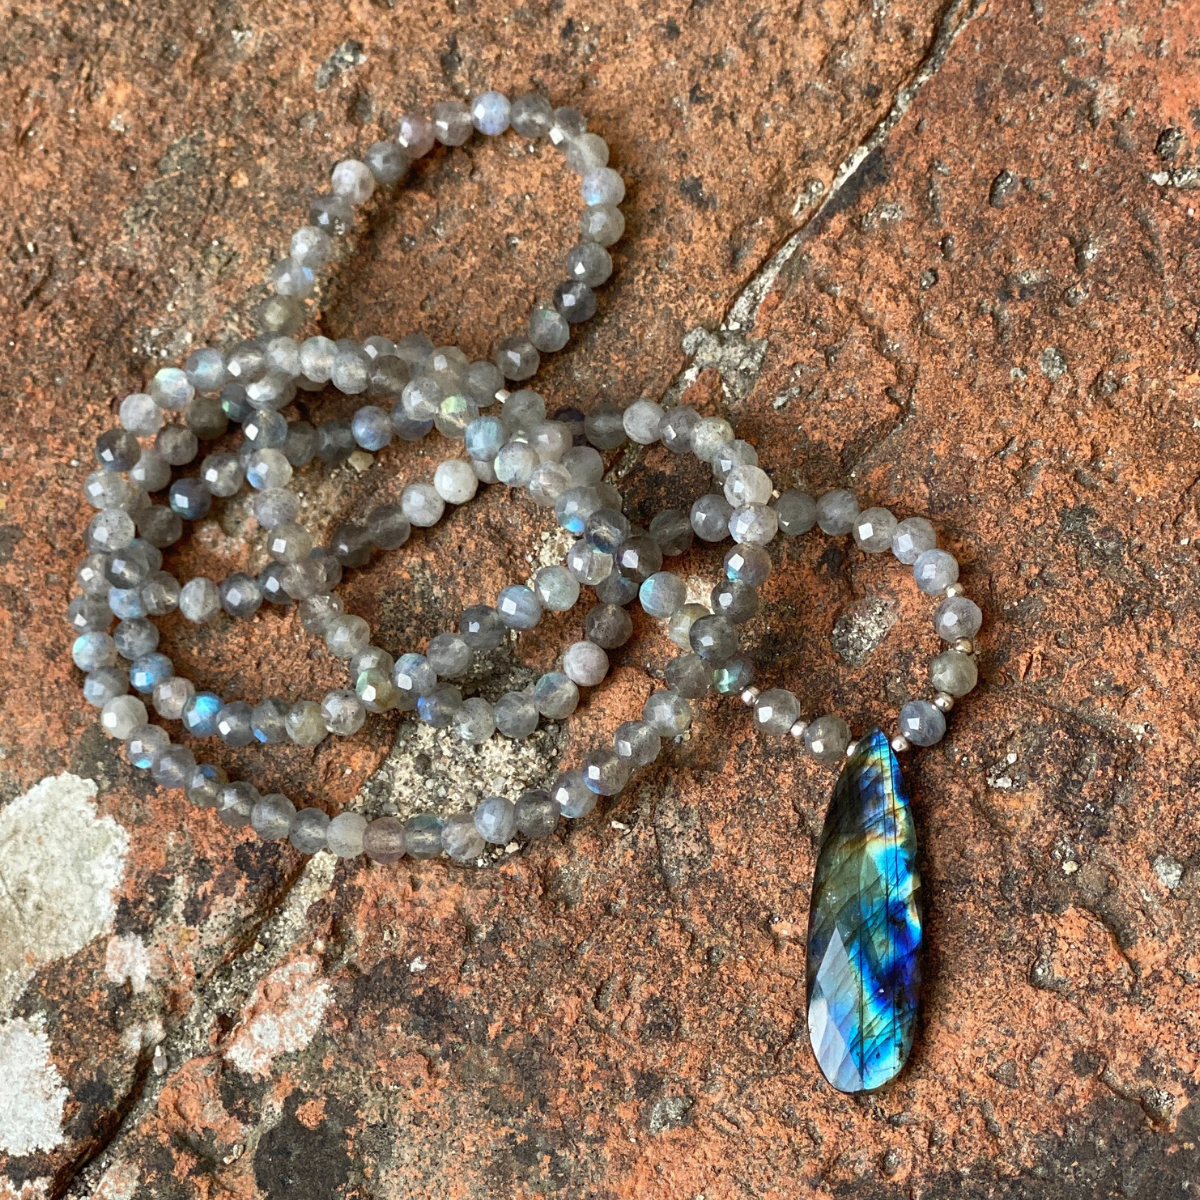 Labradorite Necklace to bring Positivity and Enthusiasm into your life.